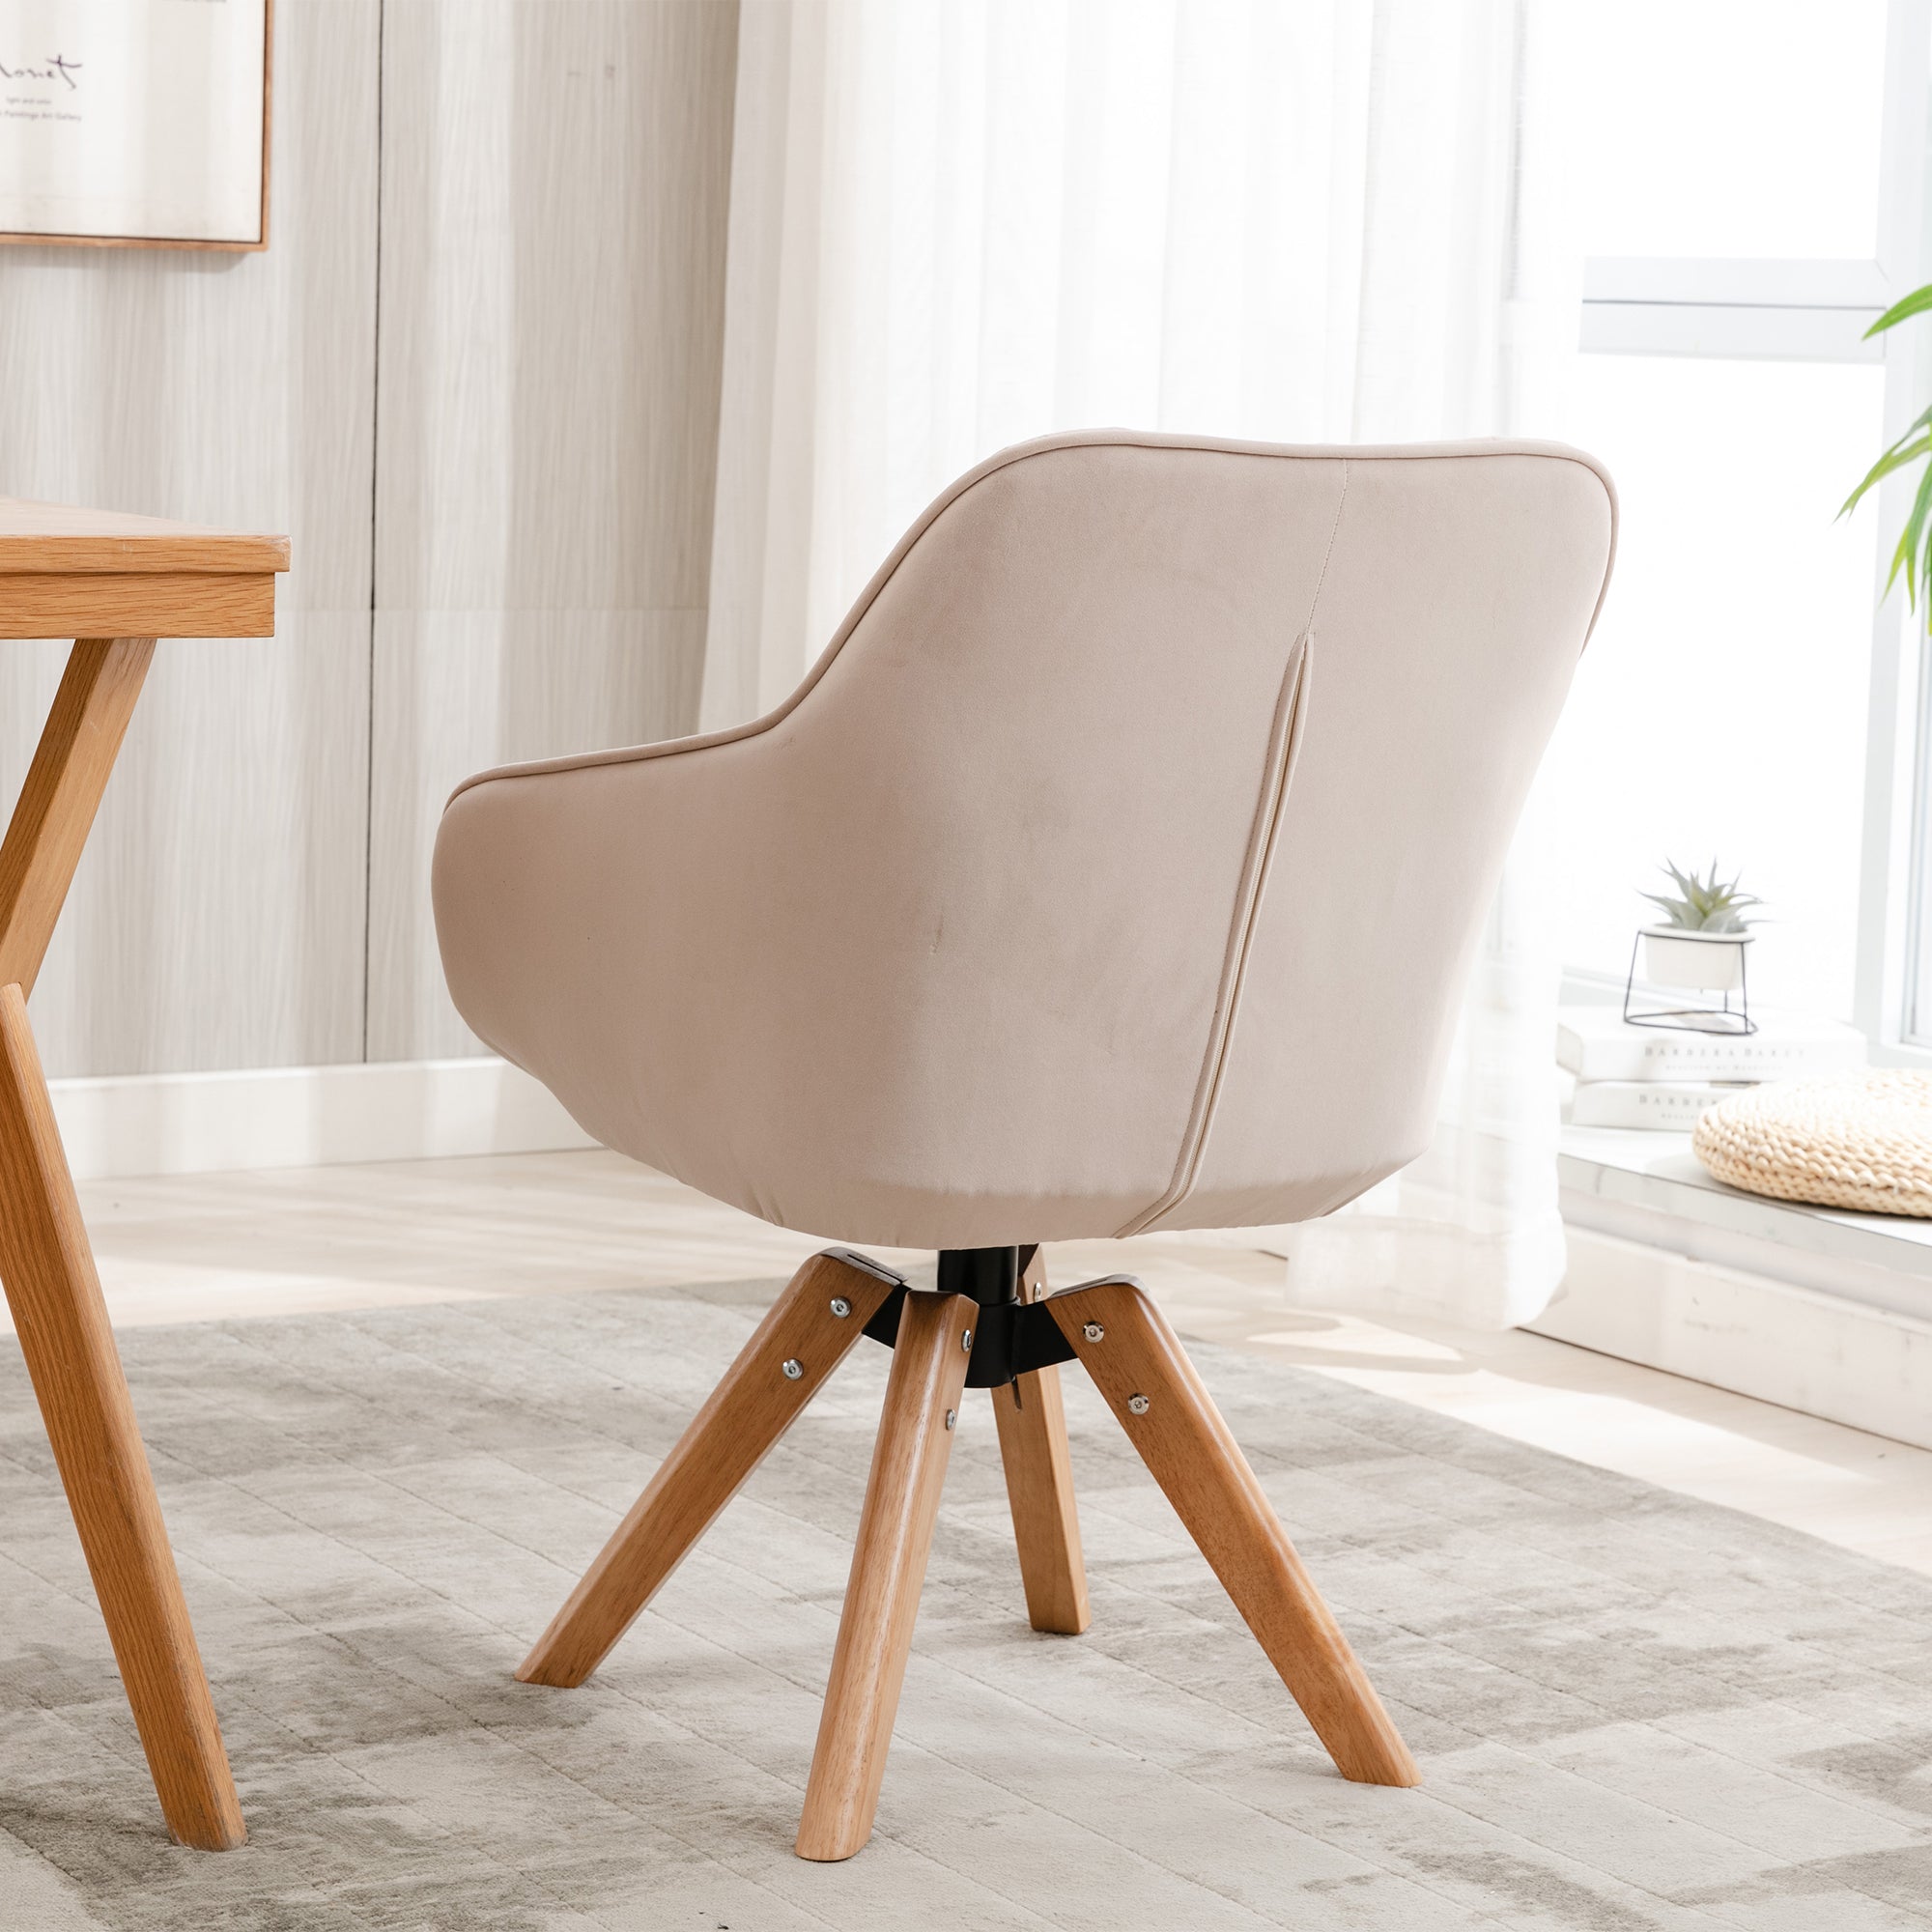 COOLMORE Solid Wood Home Office Chair